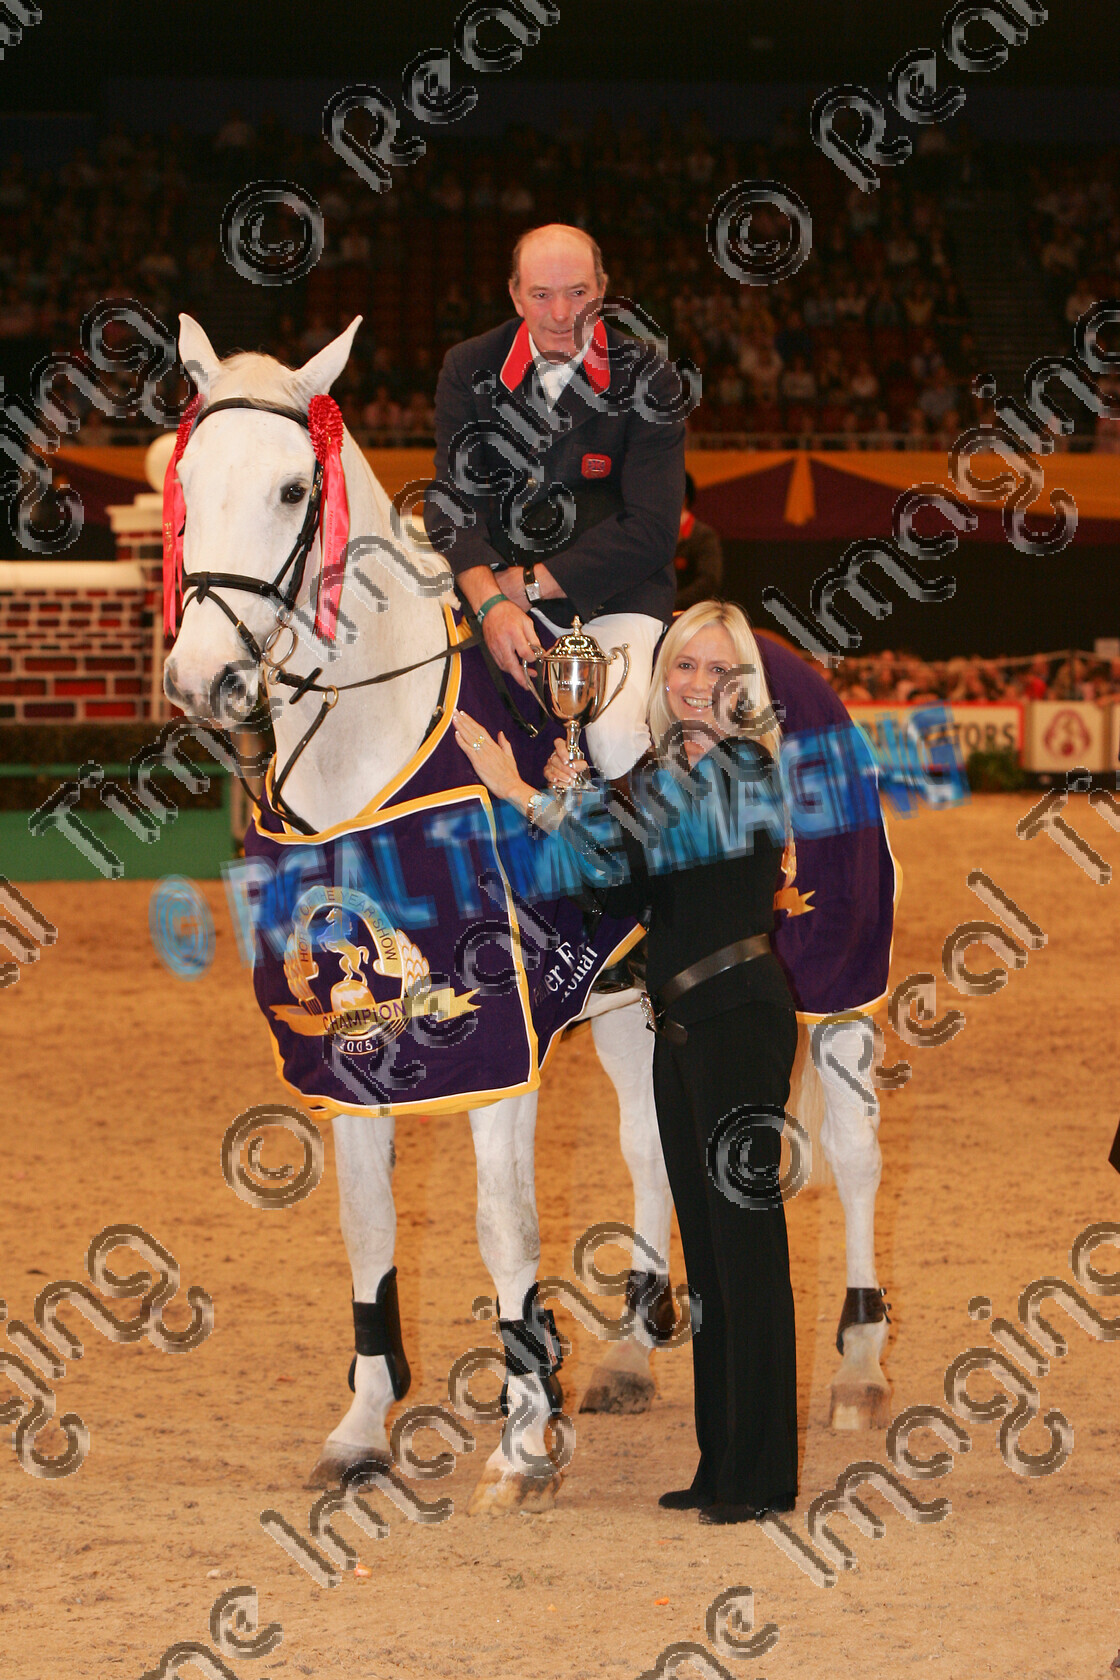 S05-67-12-069 
 HOYS 2005: The Horse Of The Year Show Puissance Winner 
 Keywords: horse of the year show 2005 05 hoys saturday 15 10 october showjumping showjumper 23 Puissance Winner 2 Lactic John Whitaker grey gray gelding standing presentation rug trophy rosette